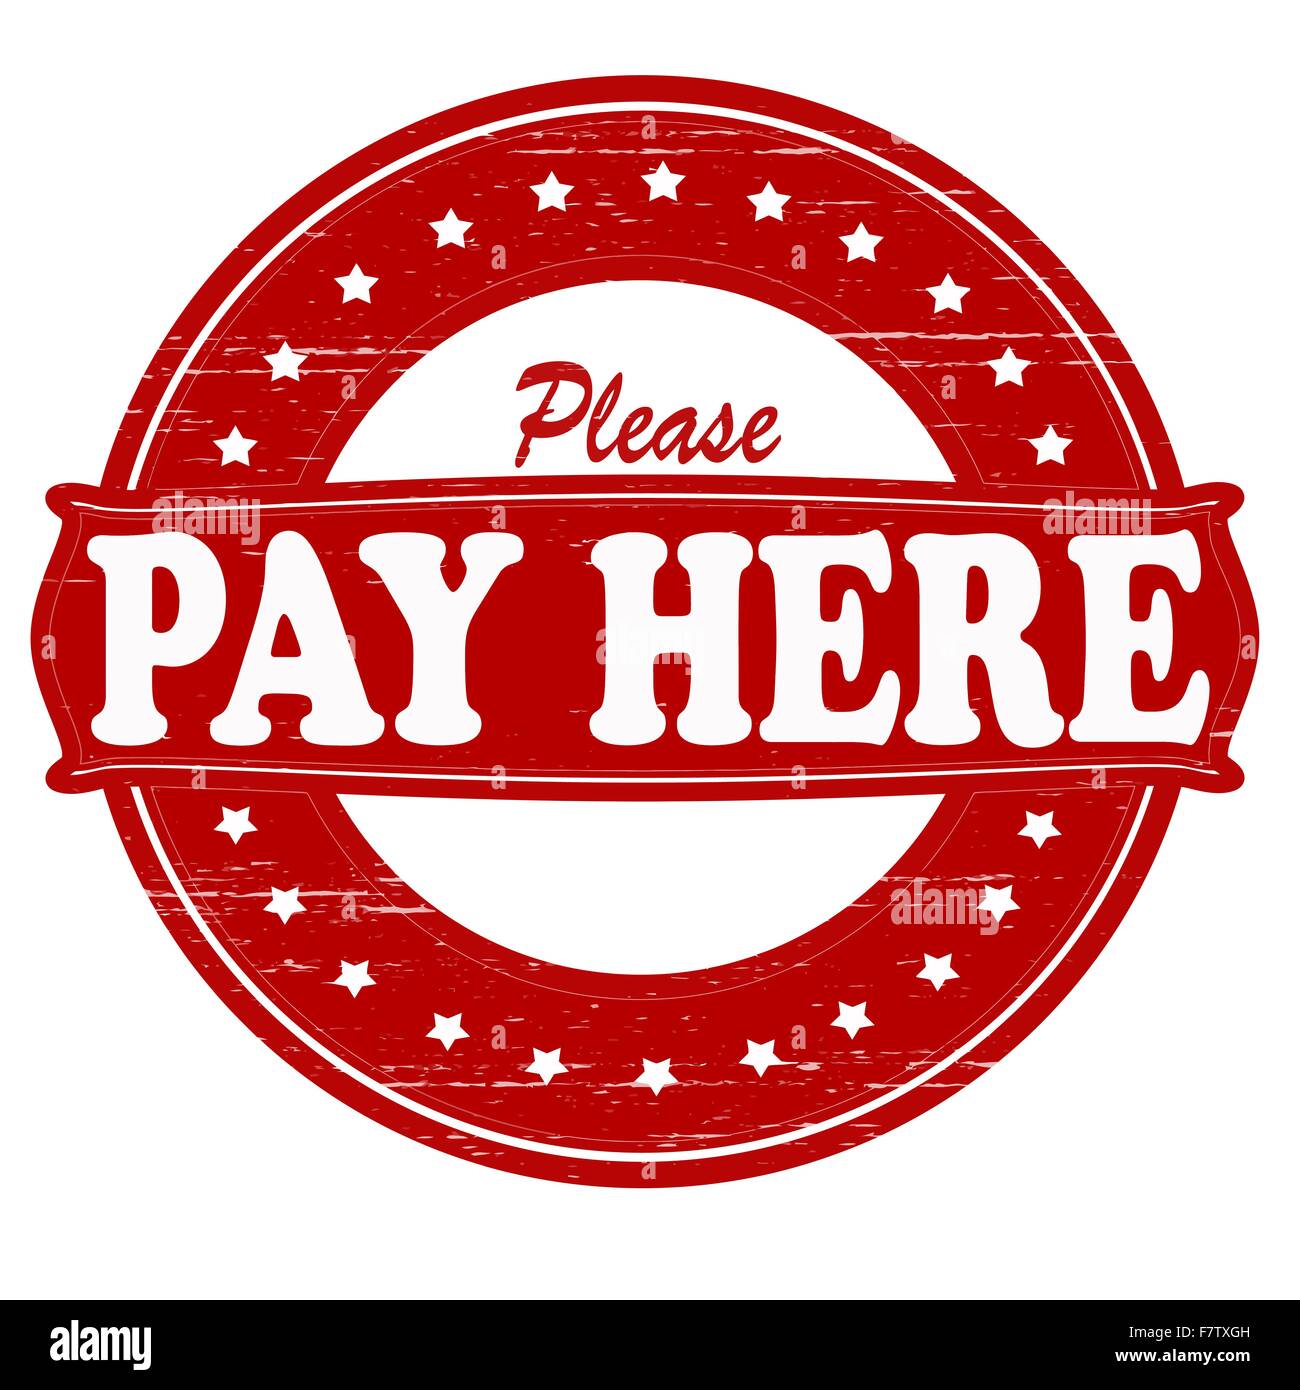 Please pay here Stock Vector